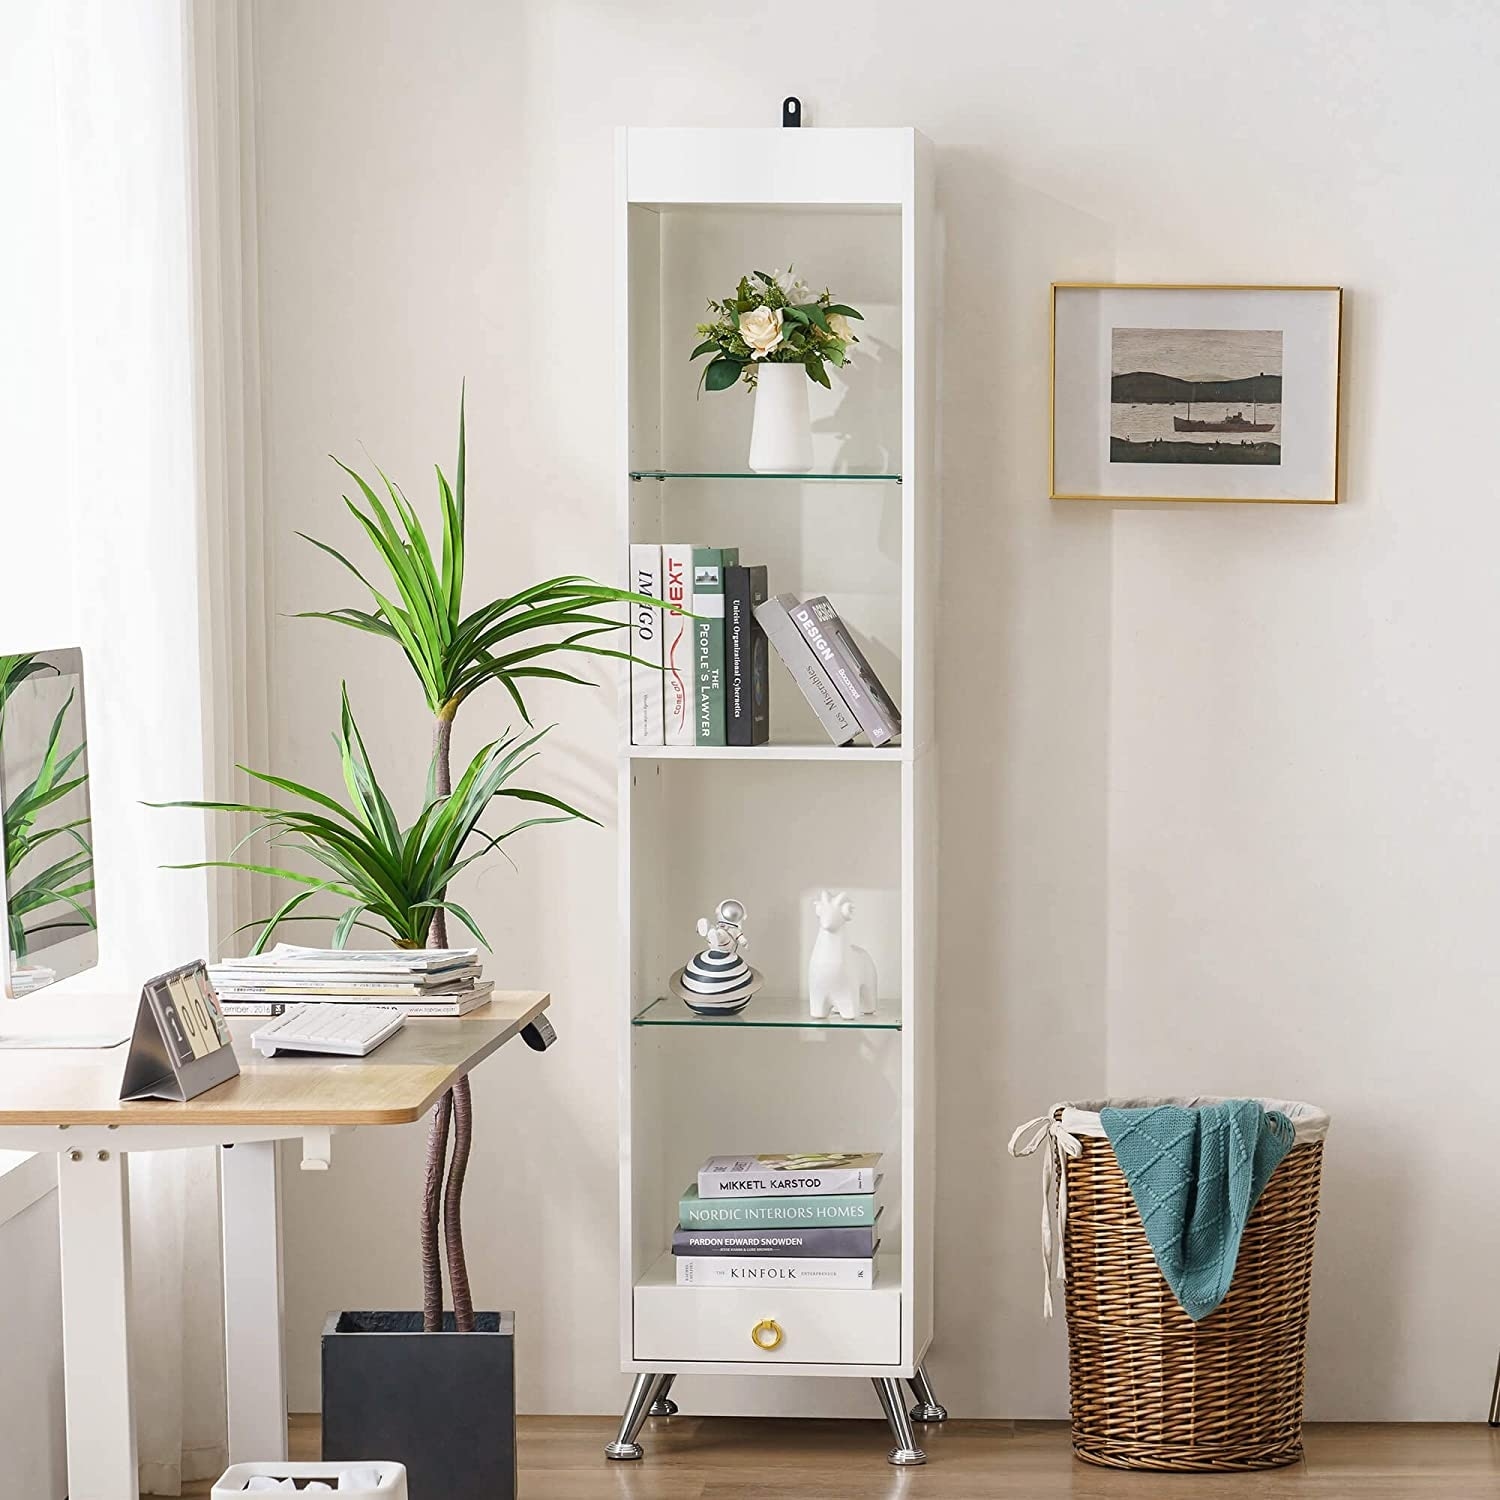 https://ak1.ostkcdn.com/images/products/is/images/direct/e69dd00babf010c214f407980d13da49359ebea4/Ivinta-Tall-Bookshelf-for-Small-Spaces%2C-Narrow-Bookcase-with-Adjustable-Glass-Display-Shelf.jpg